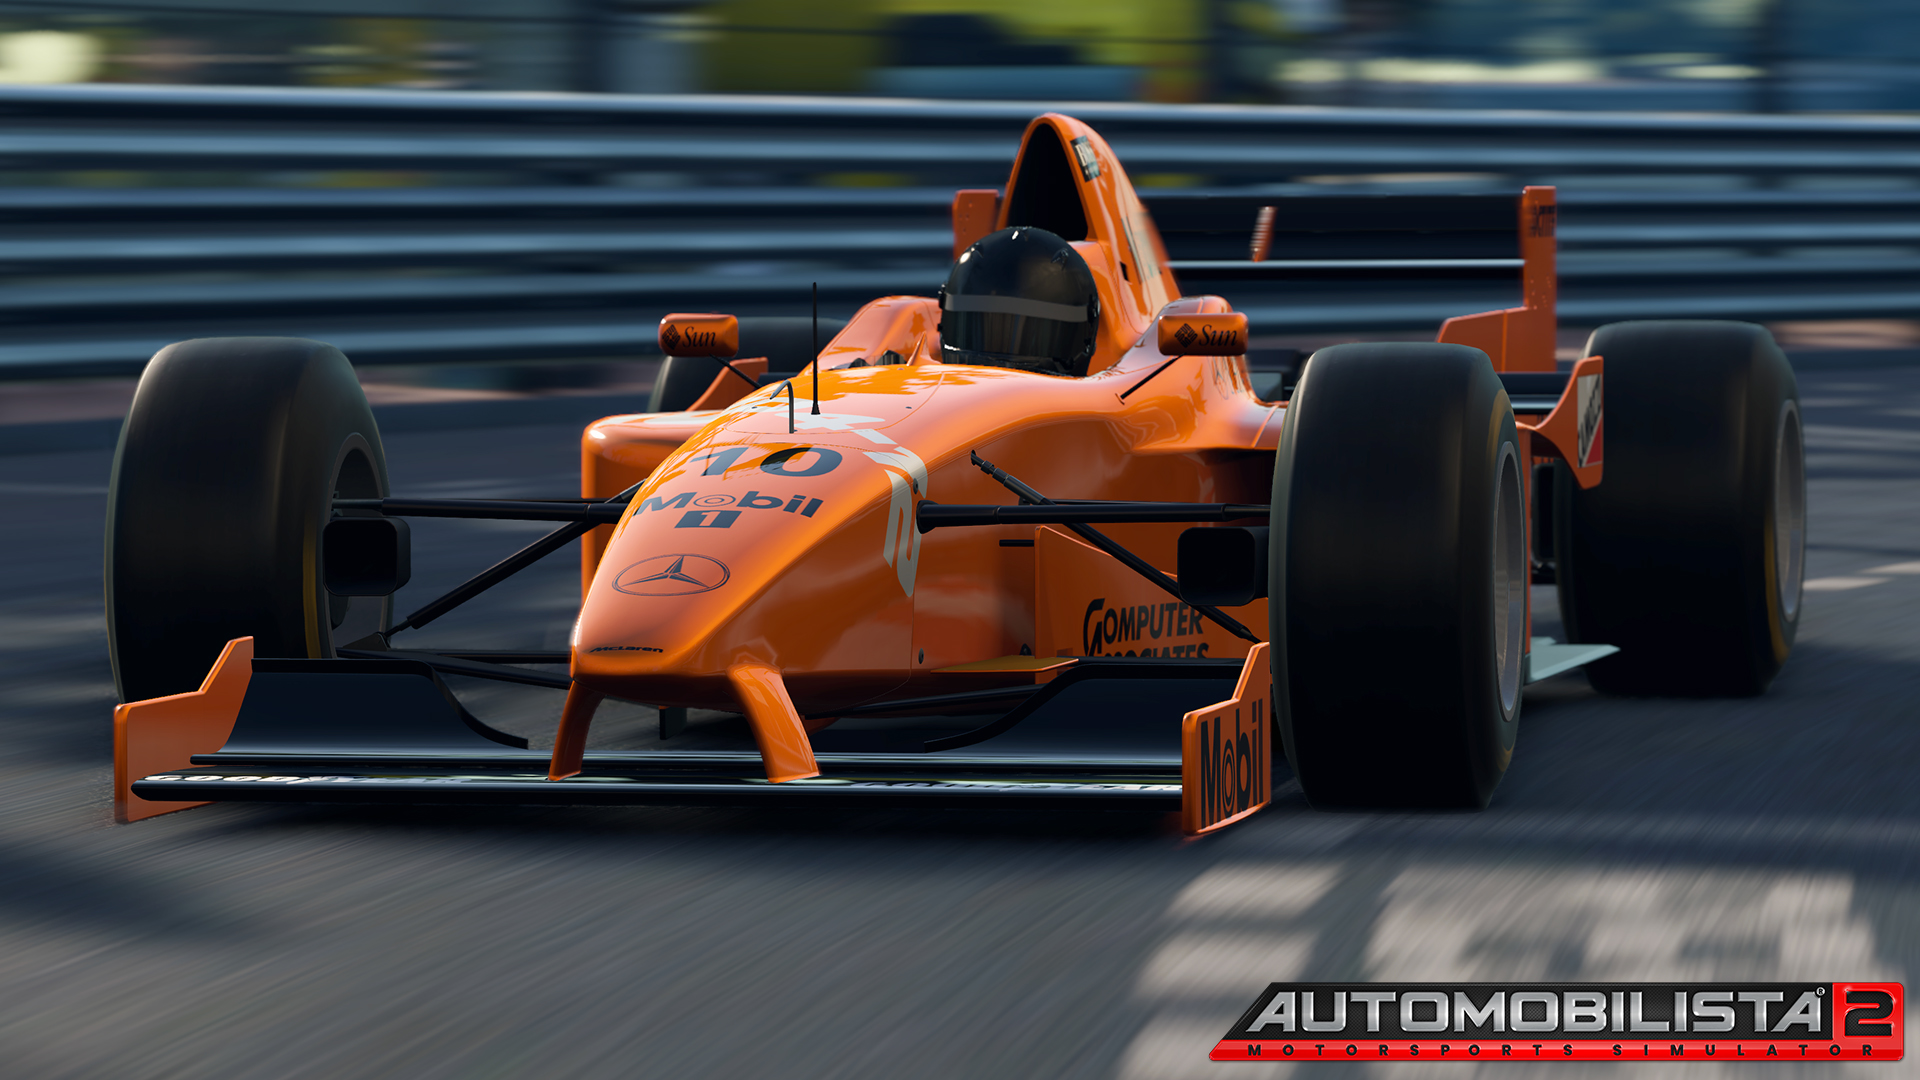 Automobilista 2 V1.0.2.5 Update Released - Now Updated to 